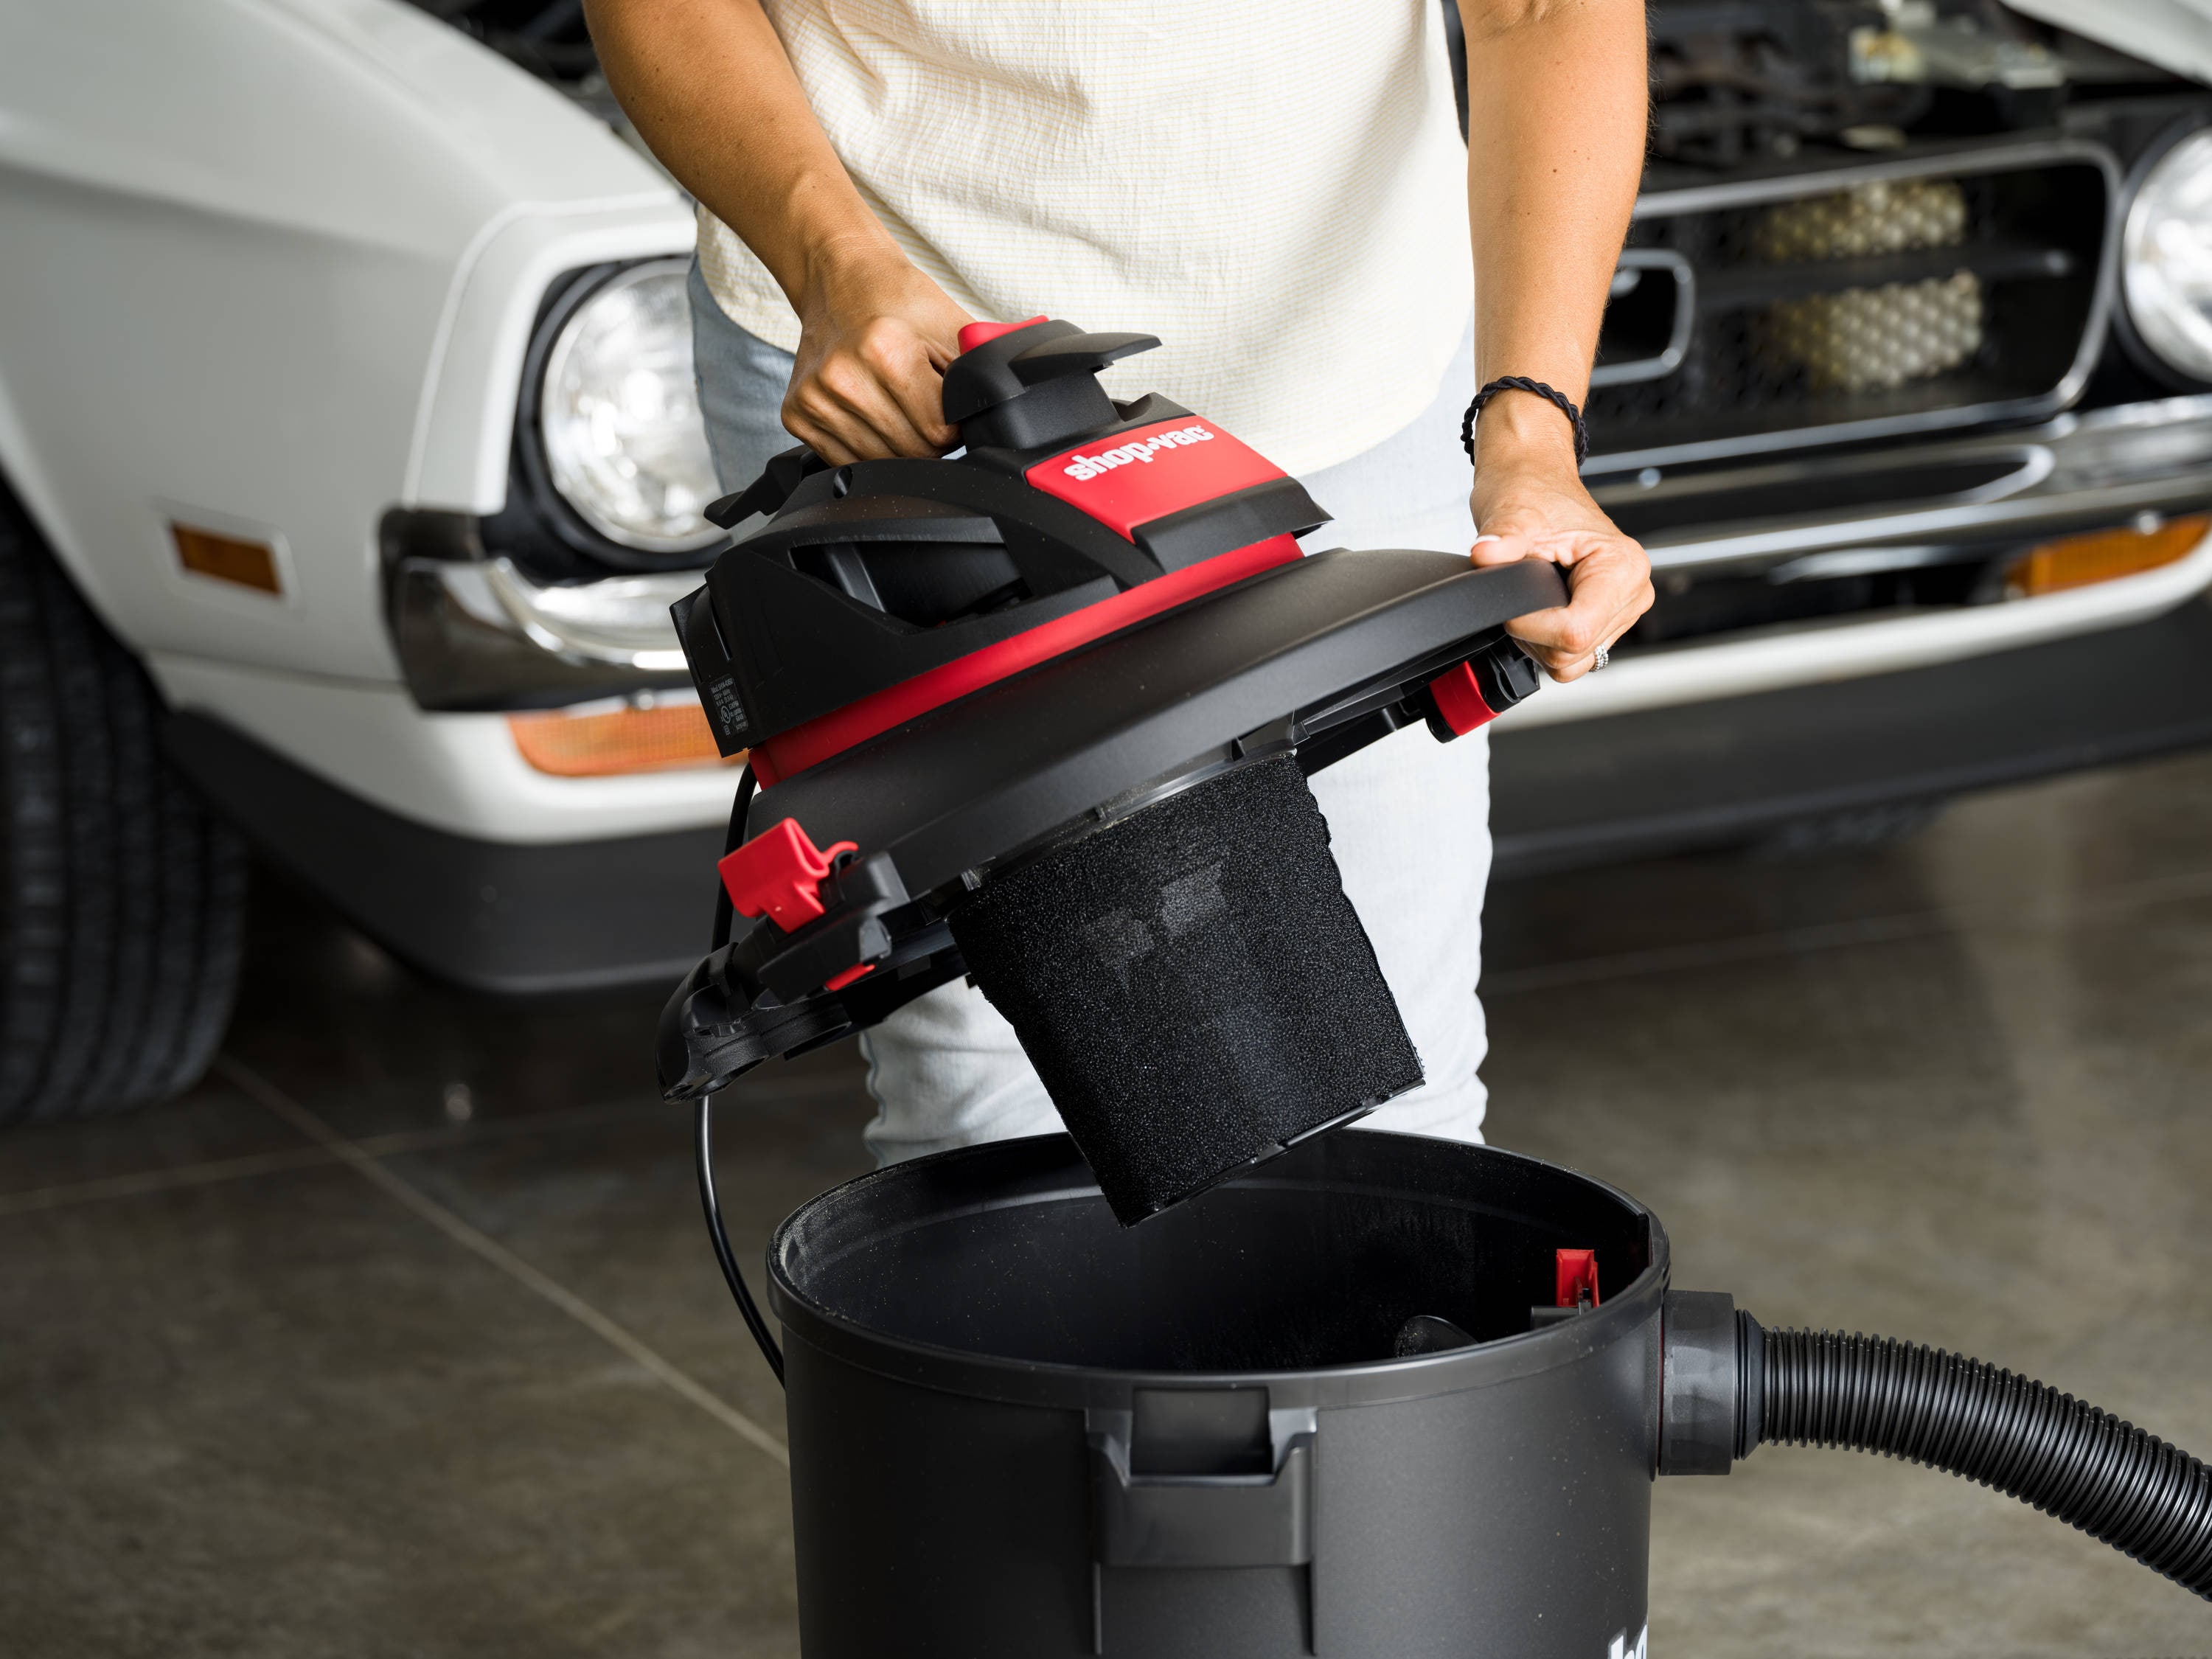 Shop-Vac 10-Gallons 4.5-HP Corded Wet/Dry Shop Vacuum with Accessories Included (5761011)